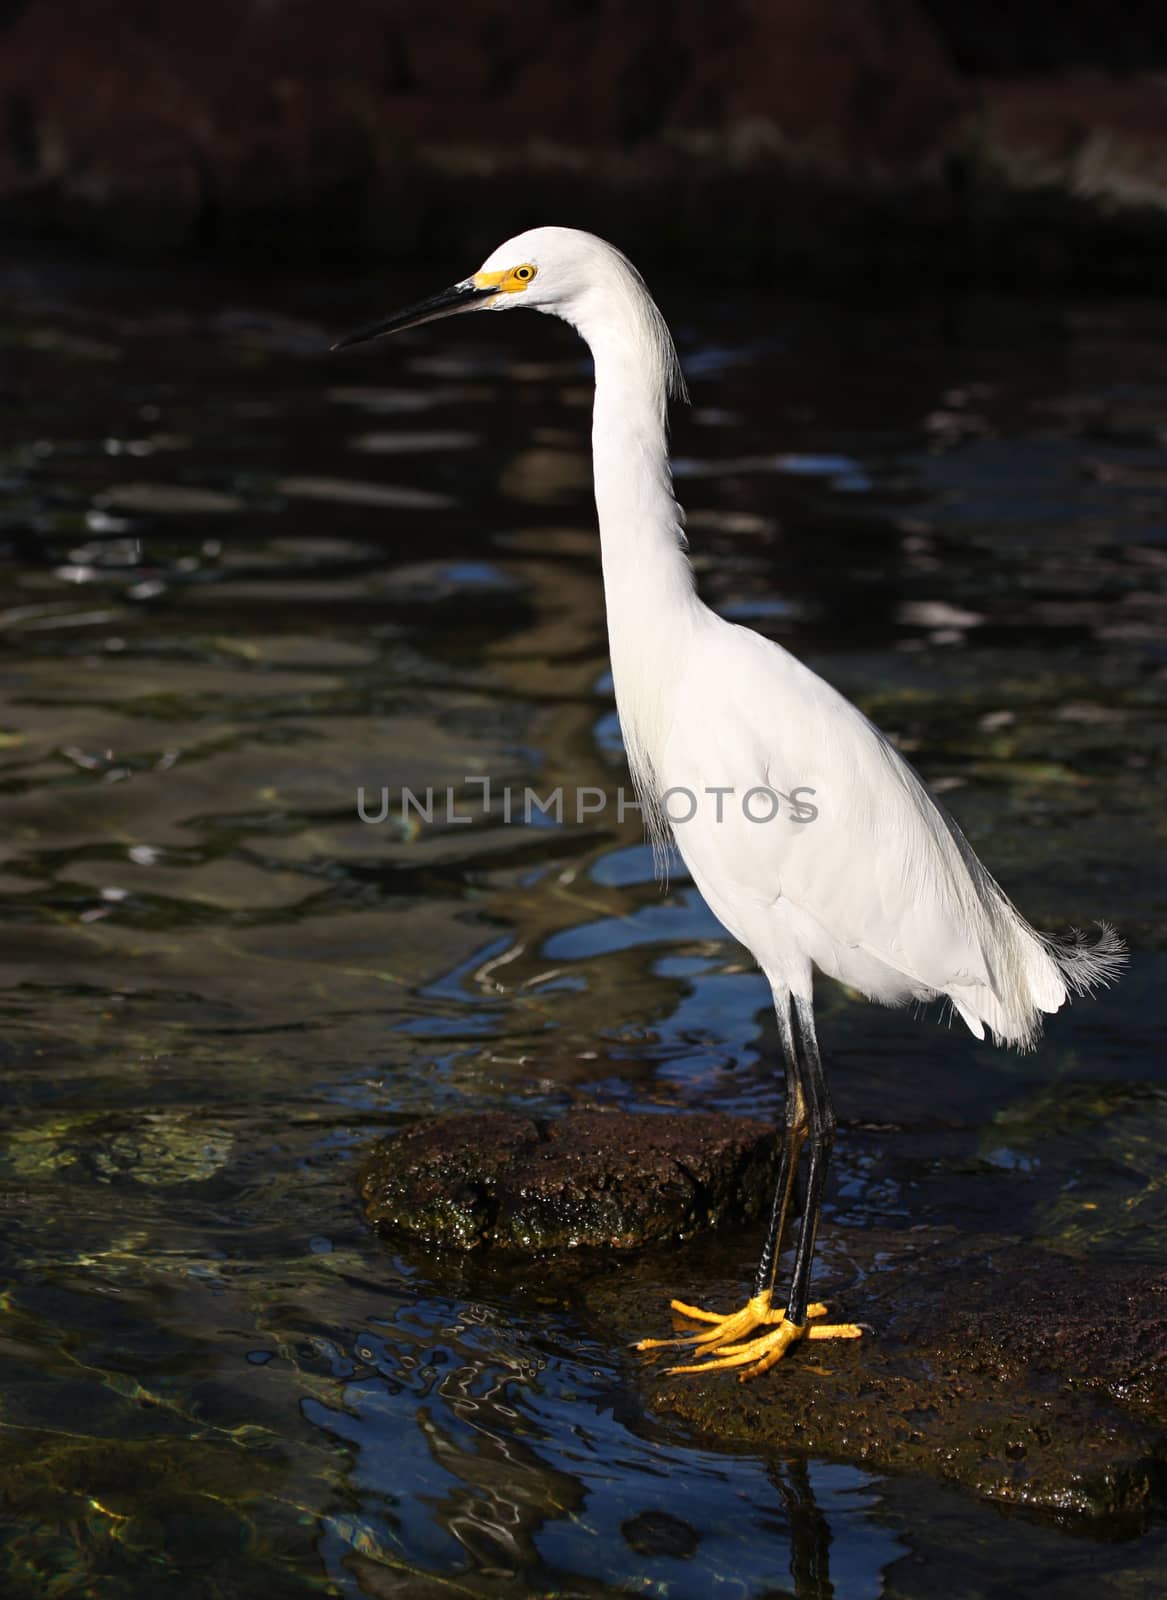 White egret on the rock near water